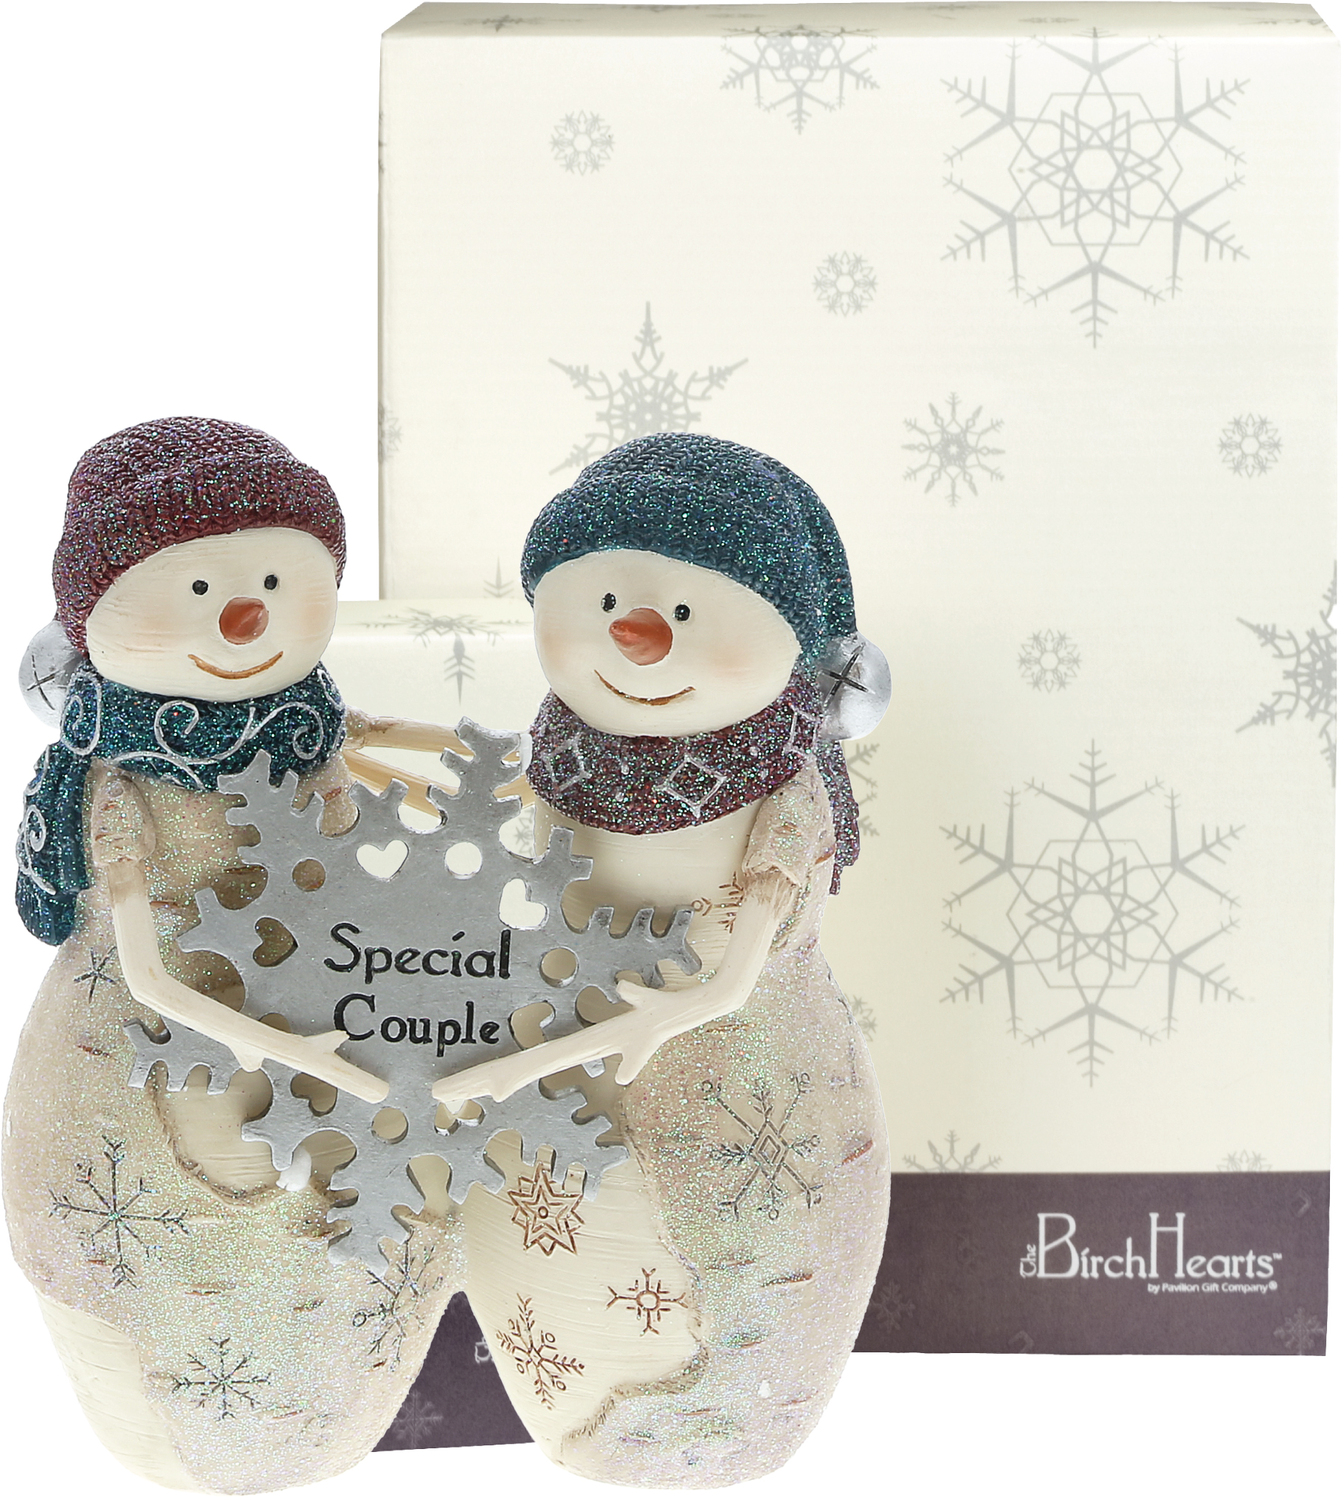 Special Couple by The Birchhearts - Special Couple - 4.5" Snowcouple Holding a Snowflake